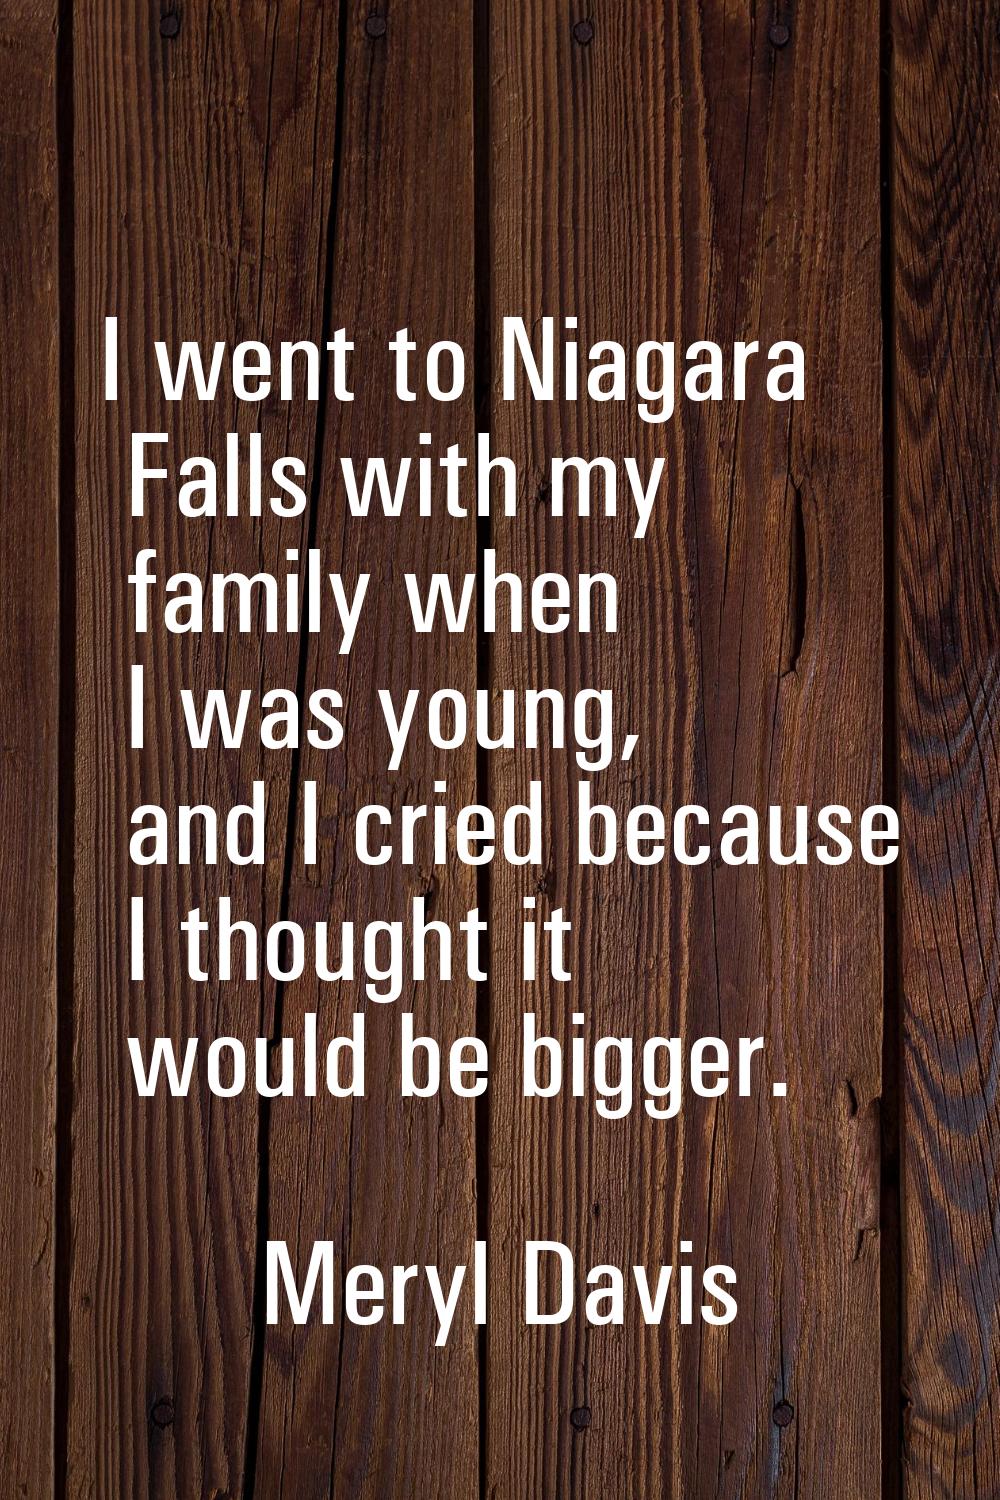 I went to Niagara Falls with my family when I was young, and I cried because I thought it would be 